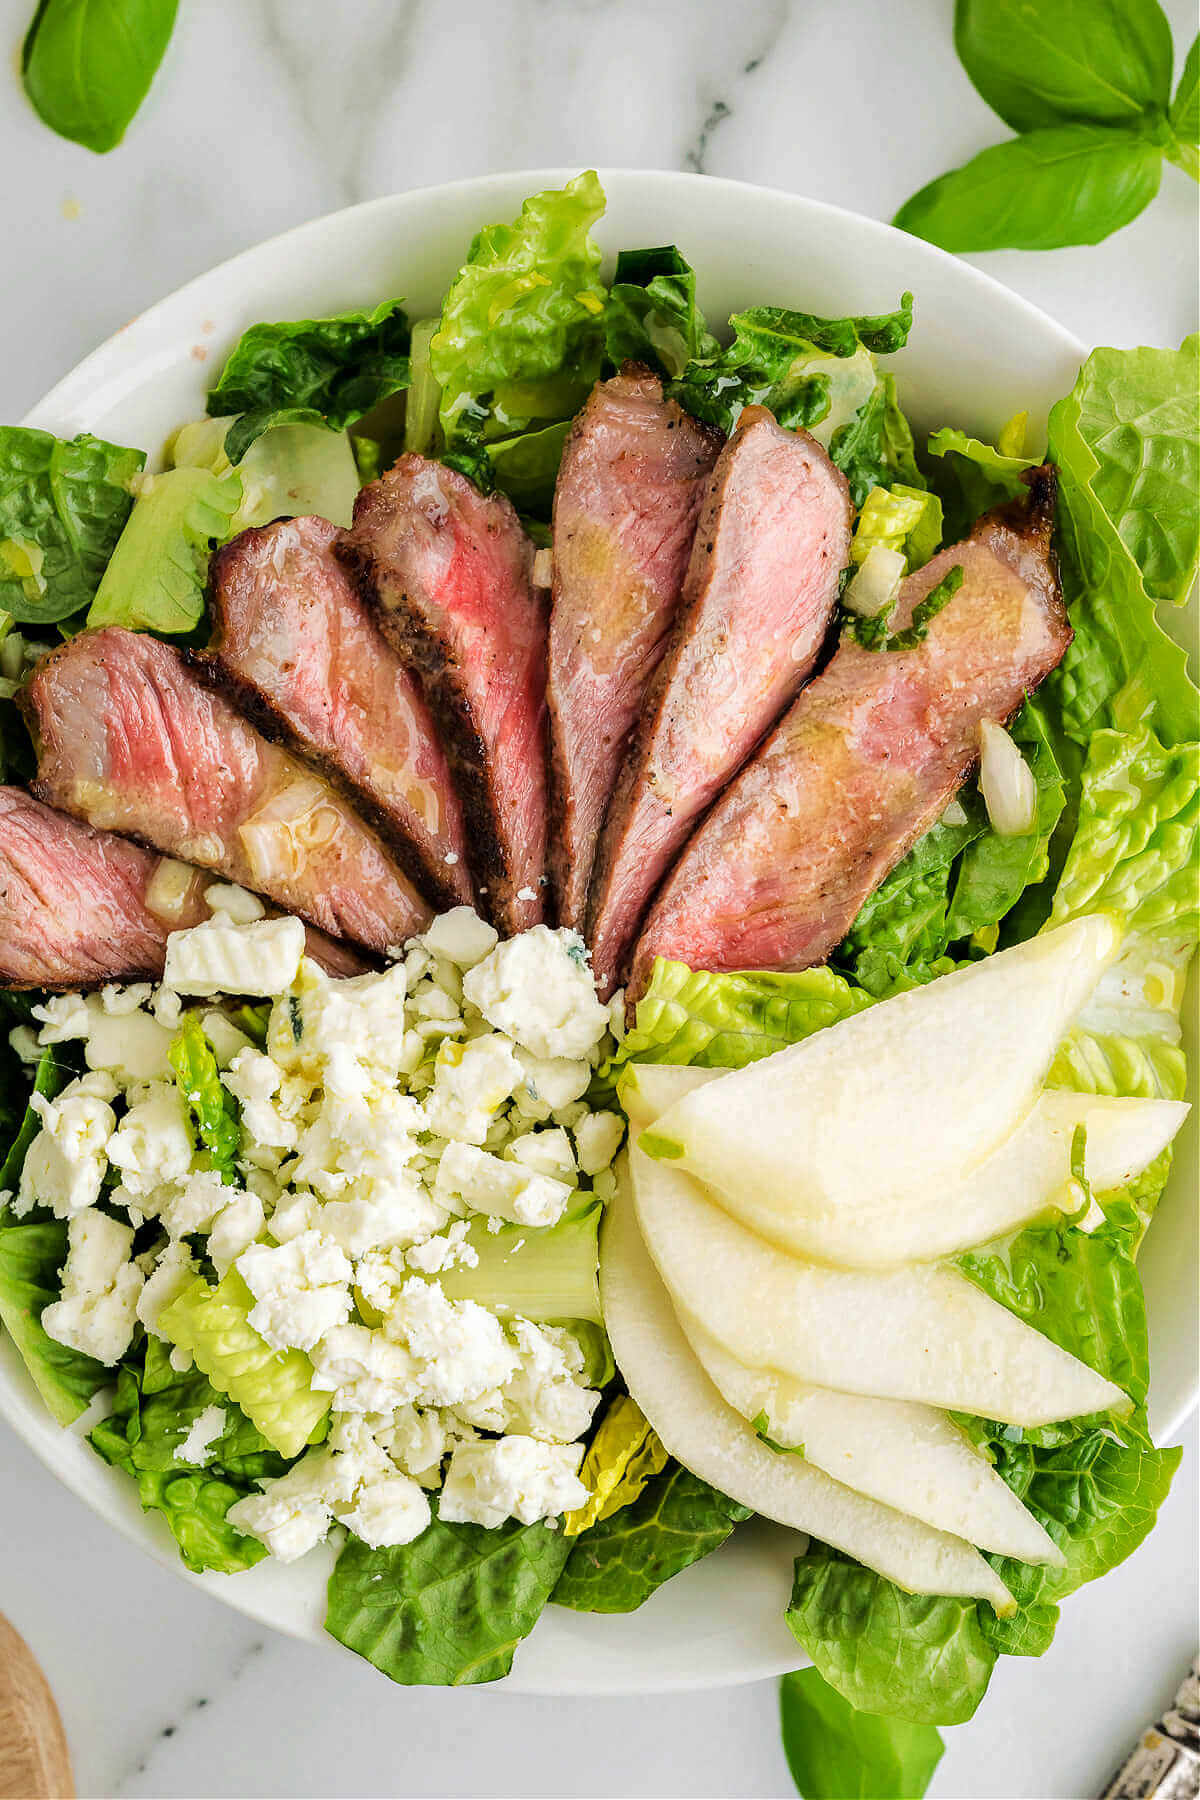 grilled steak salad with sliced pears, blue cheese, and French vinaigrette in a bowl on a table.